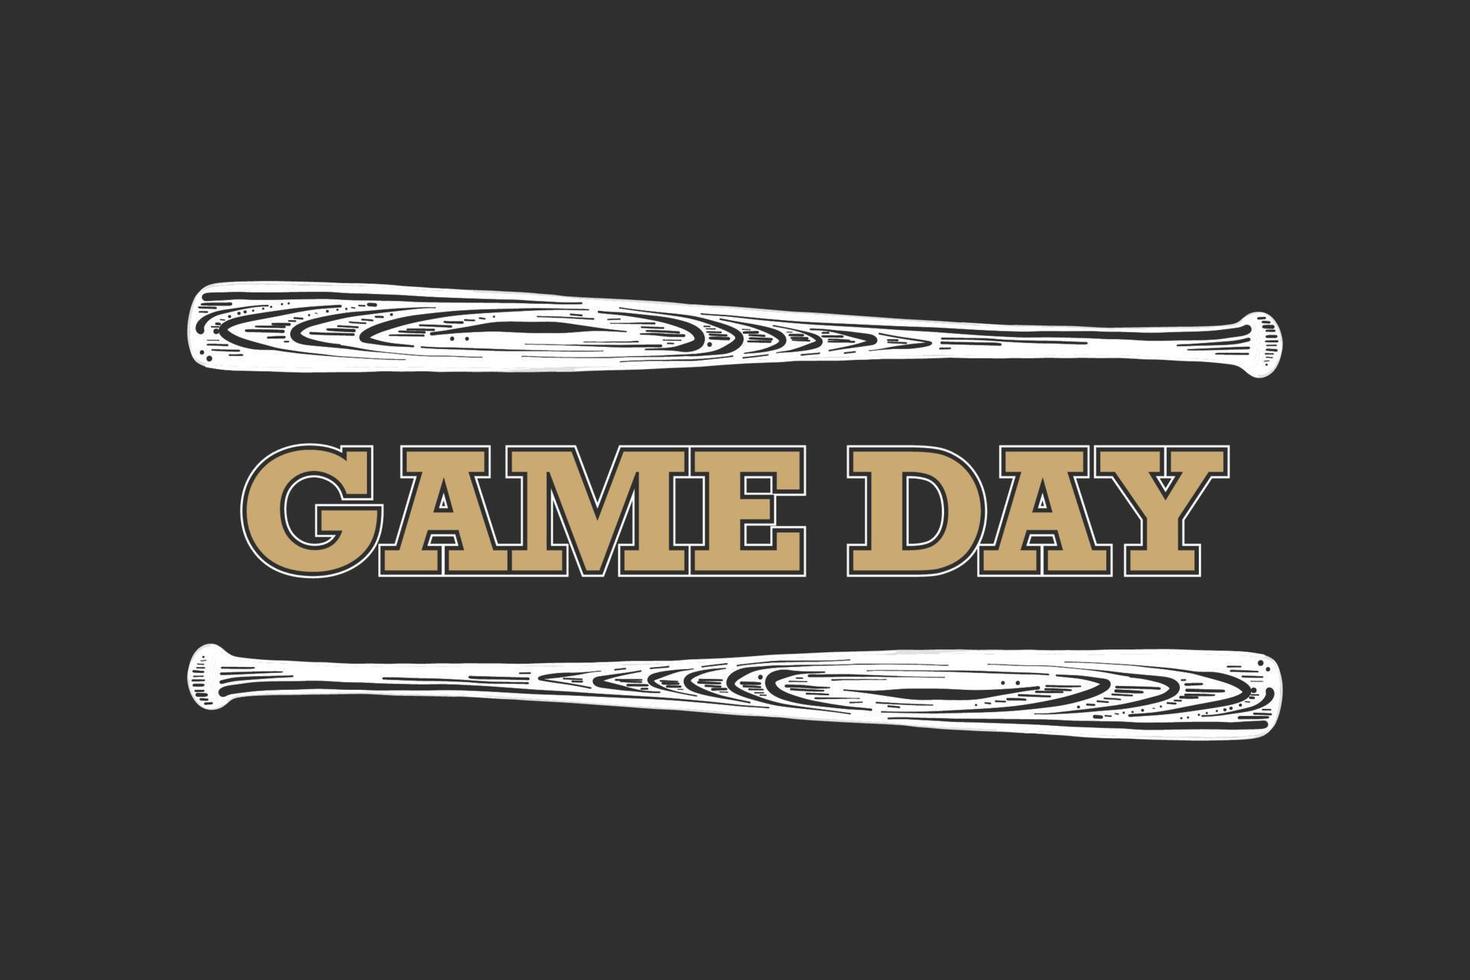 Vector engraved style illustration for posters, decoration, t-shirt design. Hand drawn sketch of baseball bat with motivational sport typography on dark background. Game day.